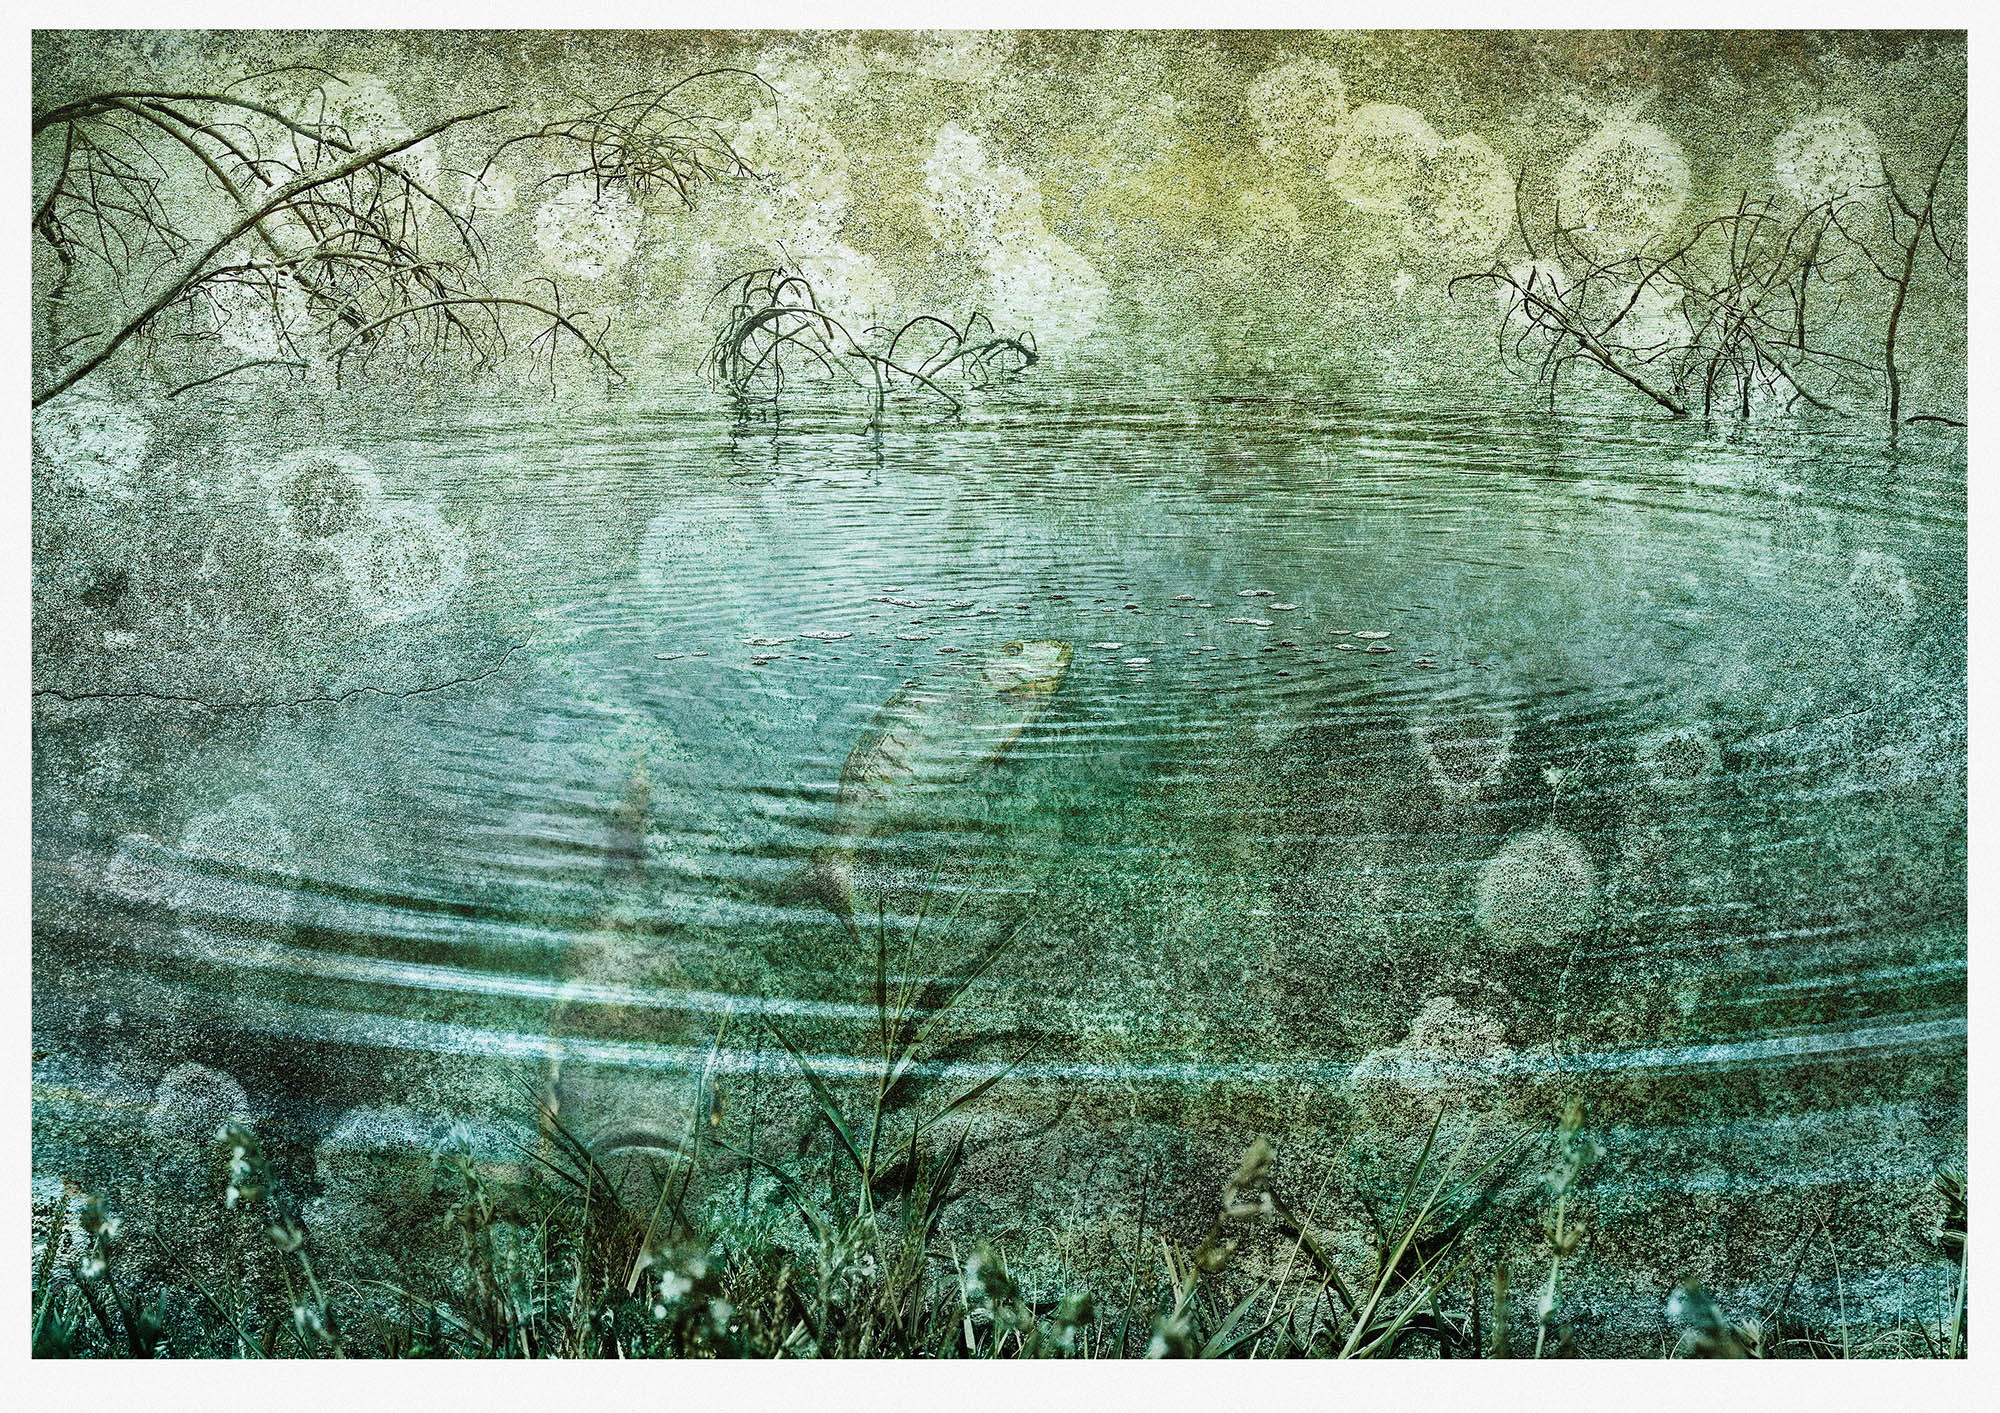 Monotoned misty pond scene with fish surfacing constructed from lichen stained wall and pond water ripples 